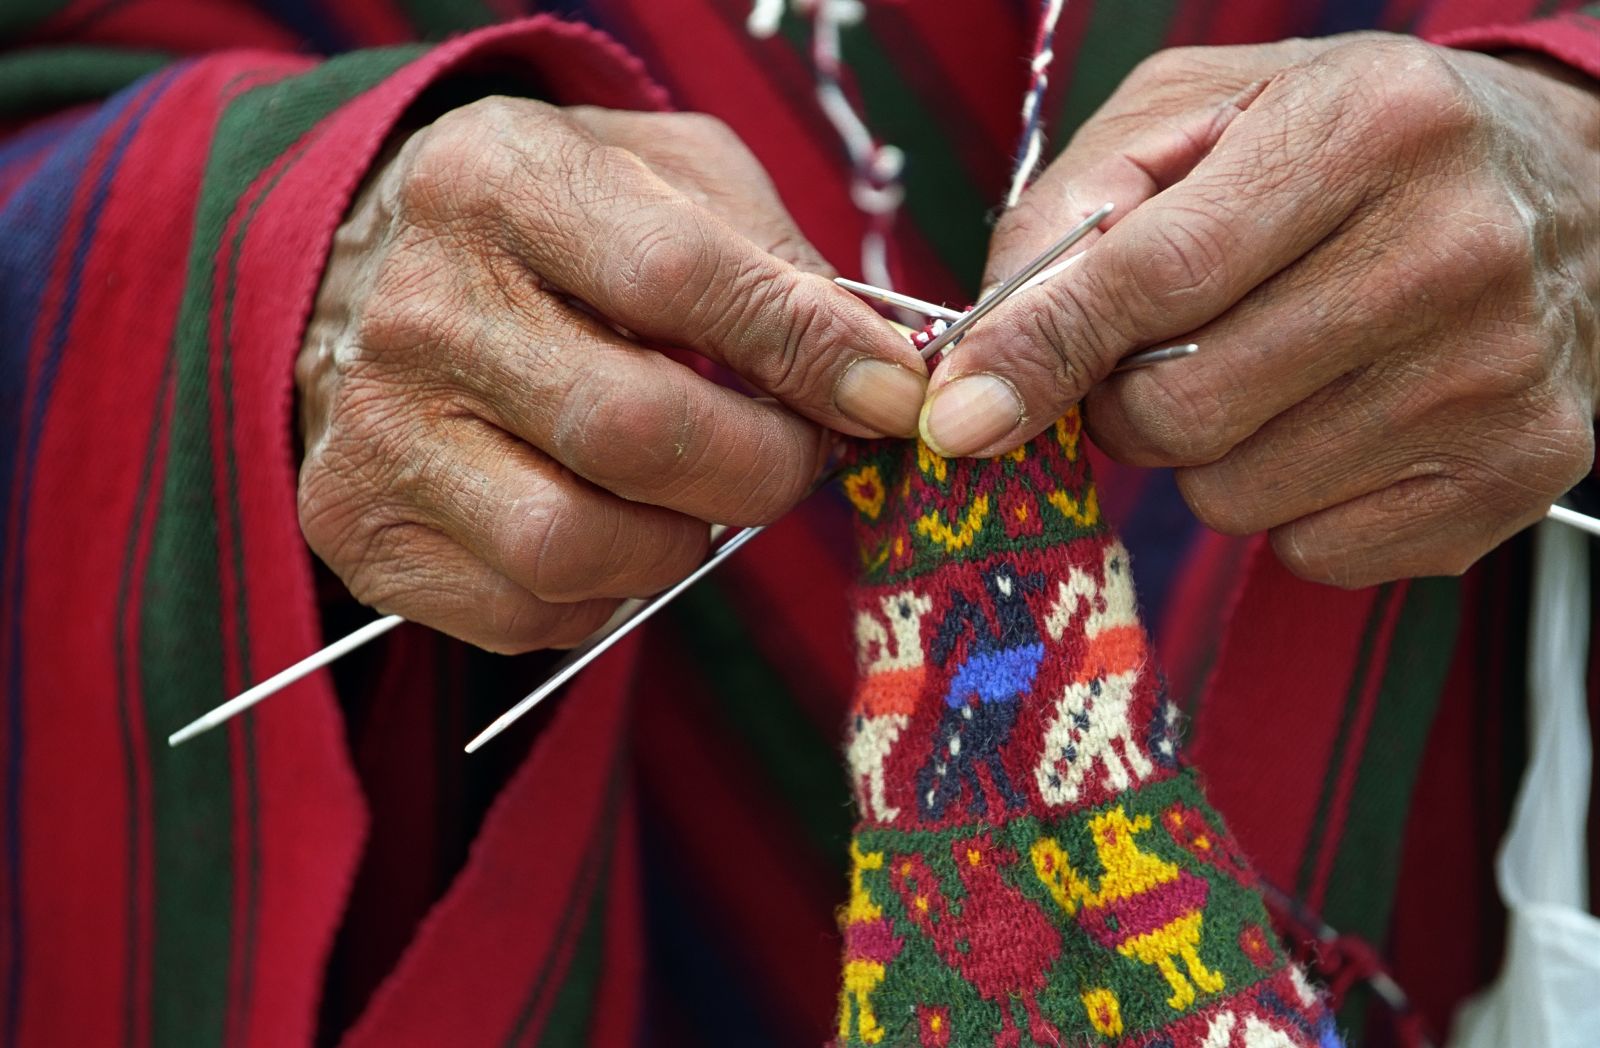 The weaving of traditional textiles in Peru